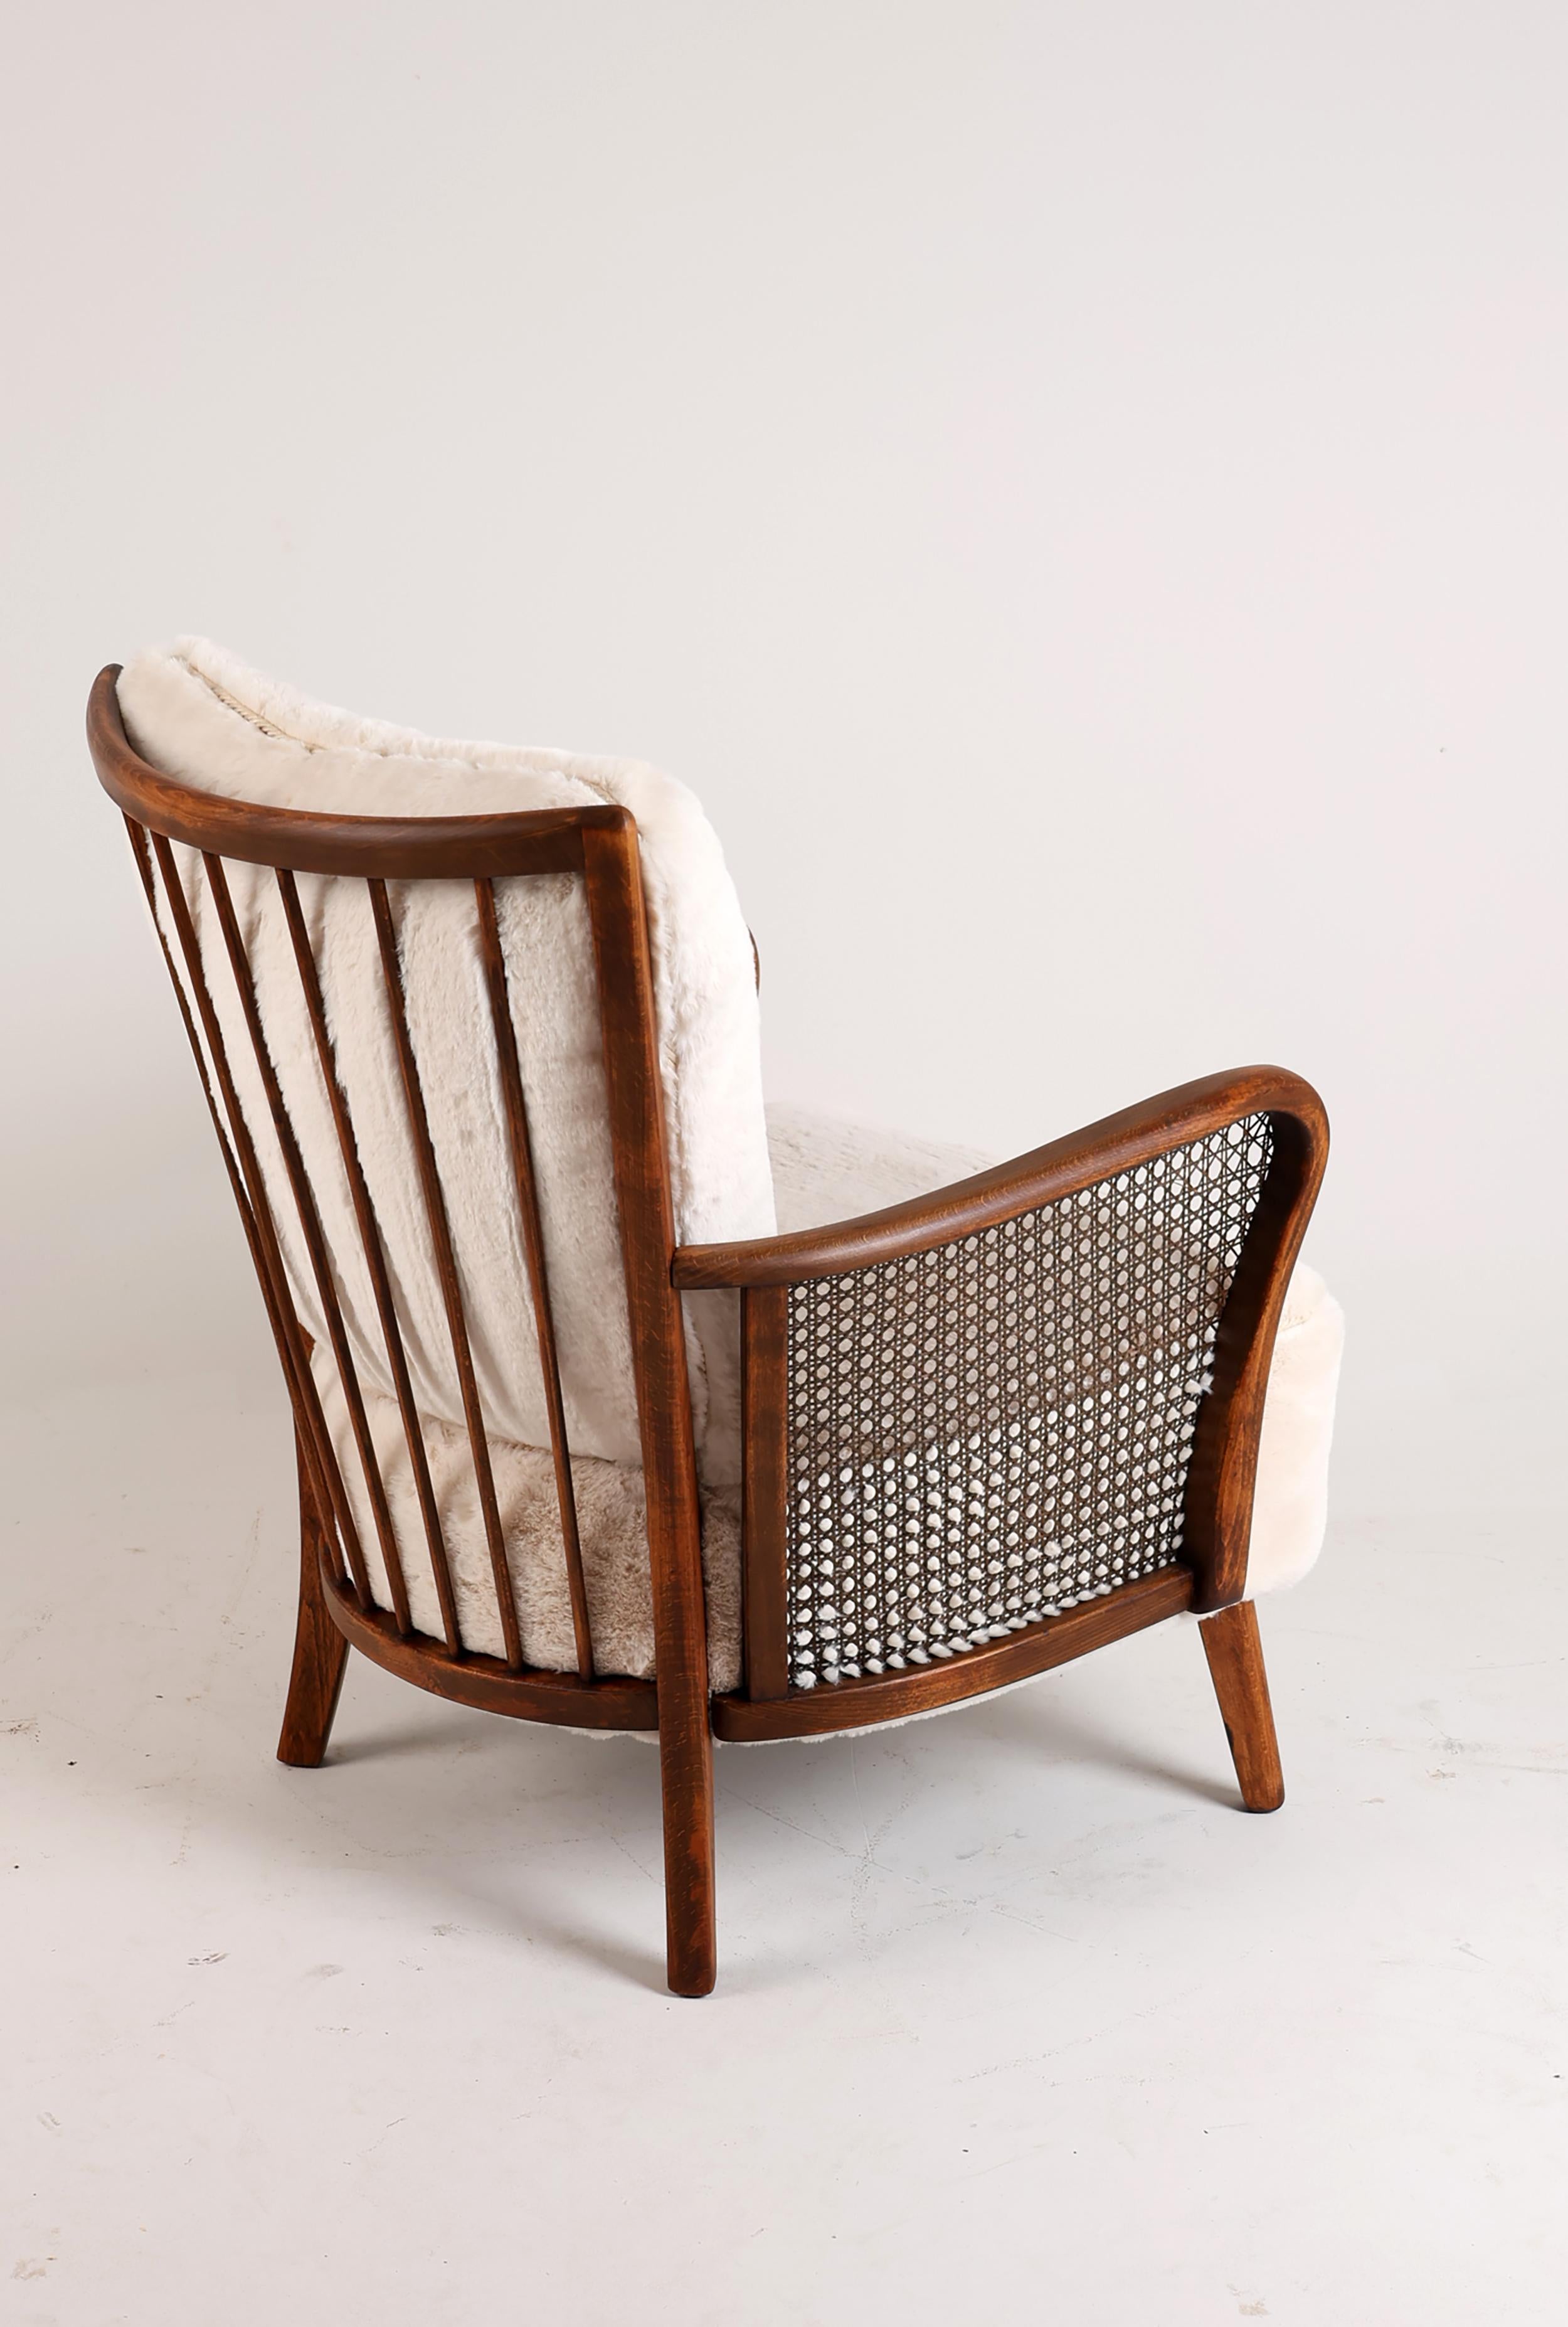 Mid 20th Century Lounge Chair in Rattan In Good Condition For Sale In Stahnsdorf, DE